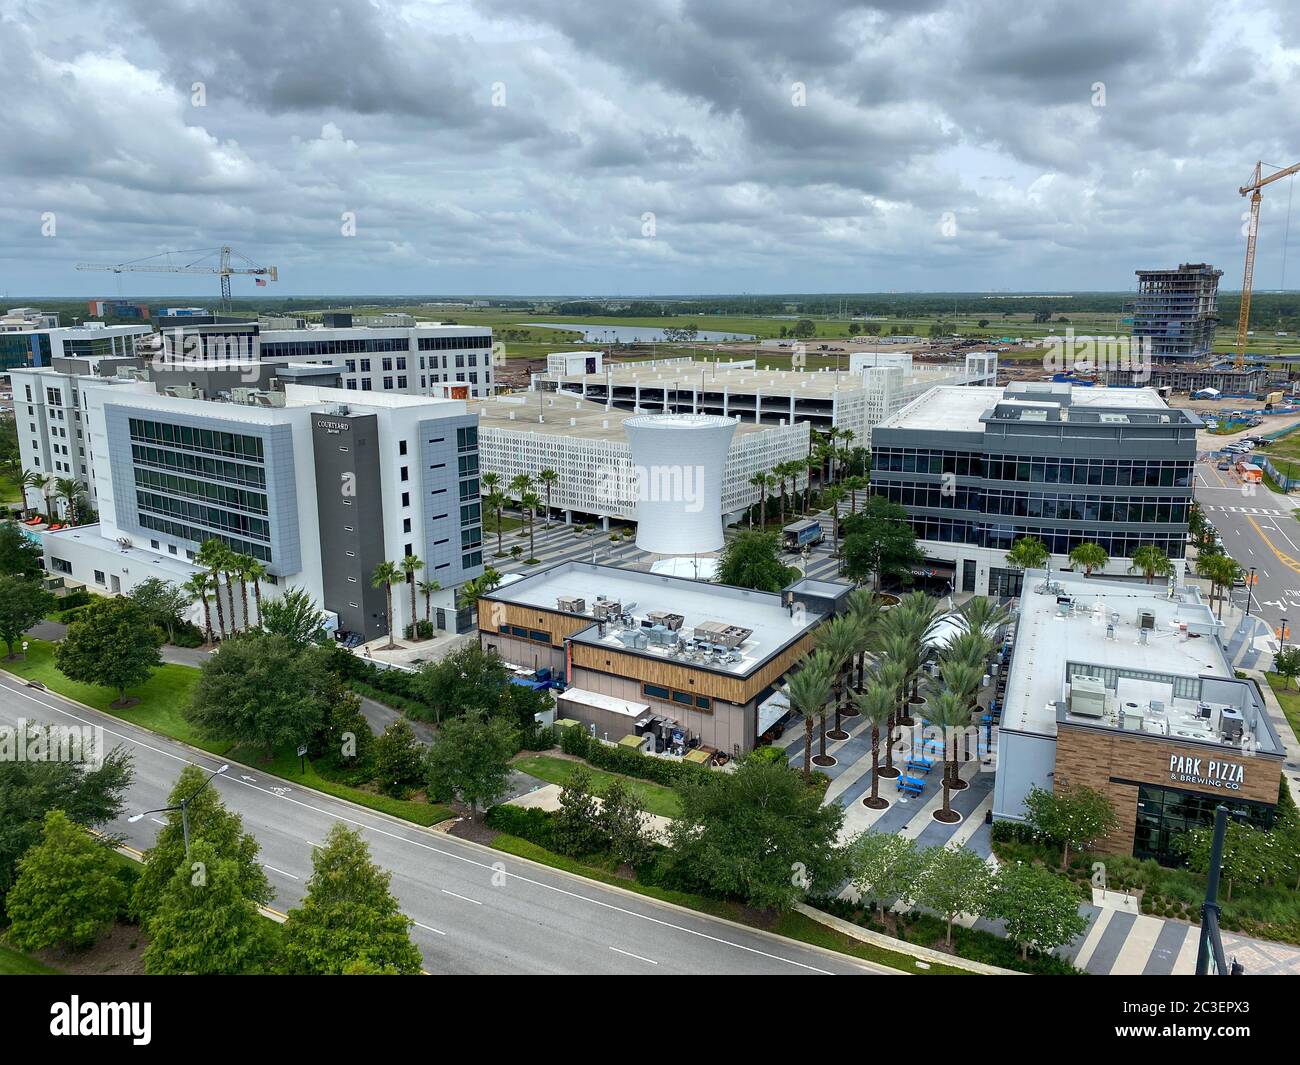 Orlando, FL/USA-6/3/20:  An aerial photo of Lake Nona's Town Center with a Marriott Courtyard hotel and restaurants in Orlando, Florida. Stock Photo